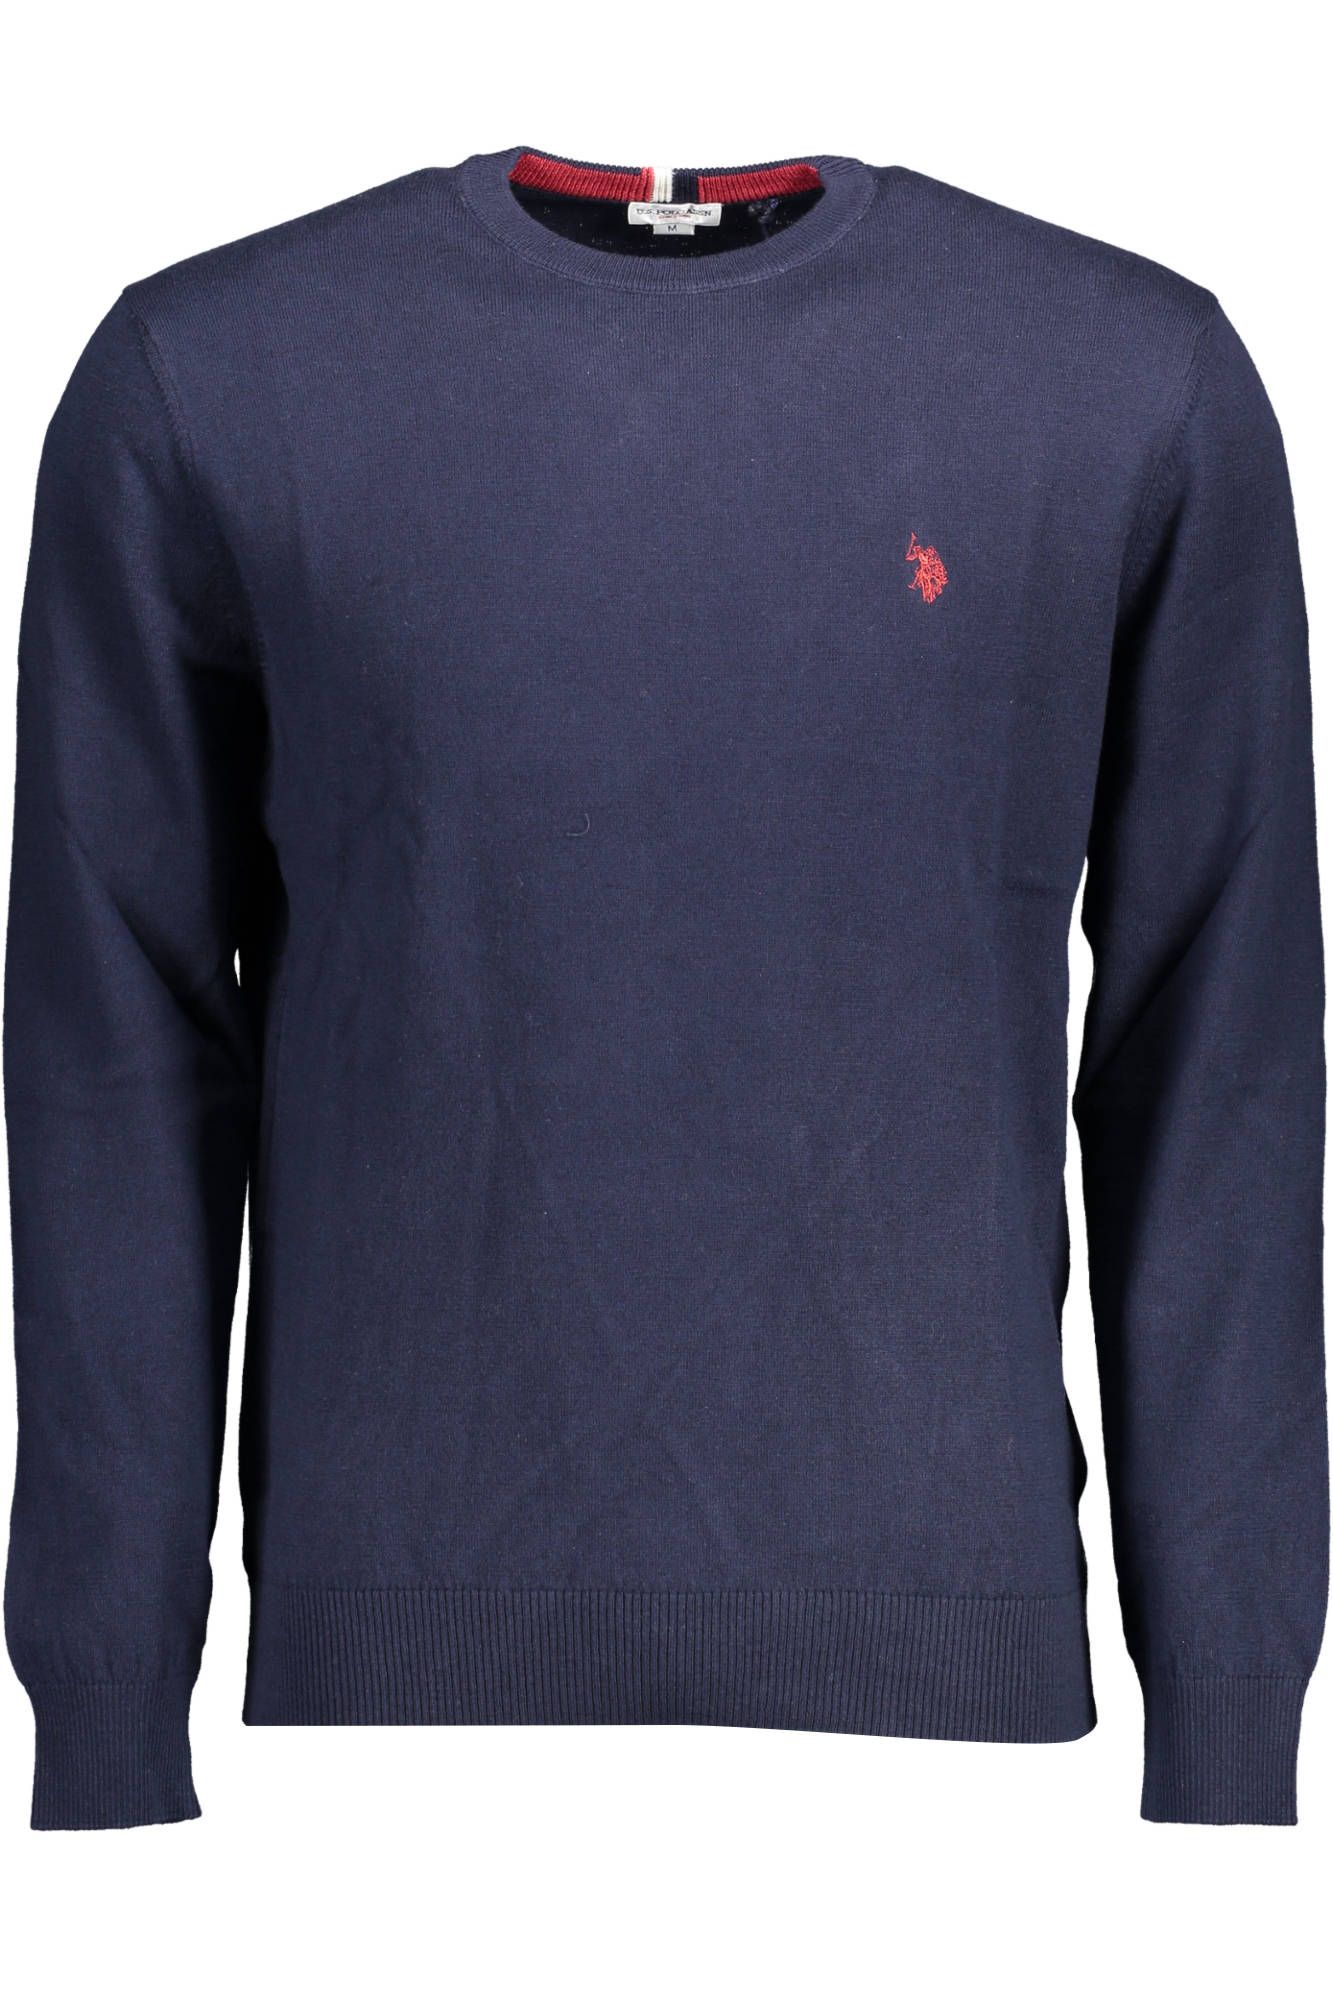 U.S. POLO ASSN. Sophisticated Blue Cotton Cashmere Sweater